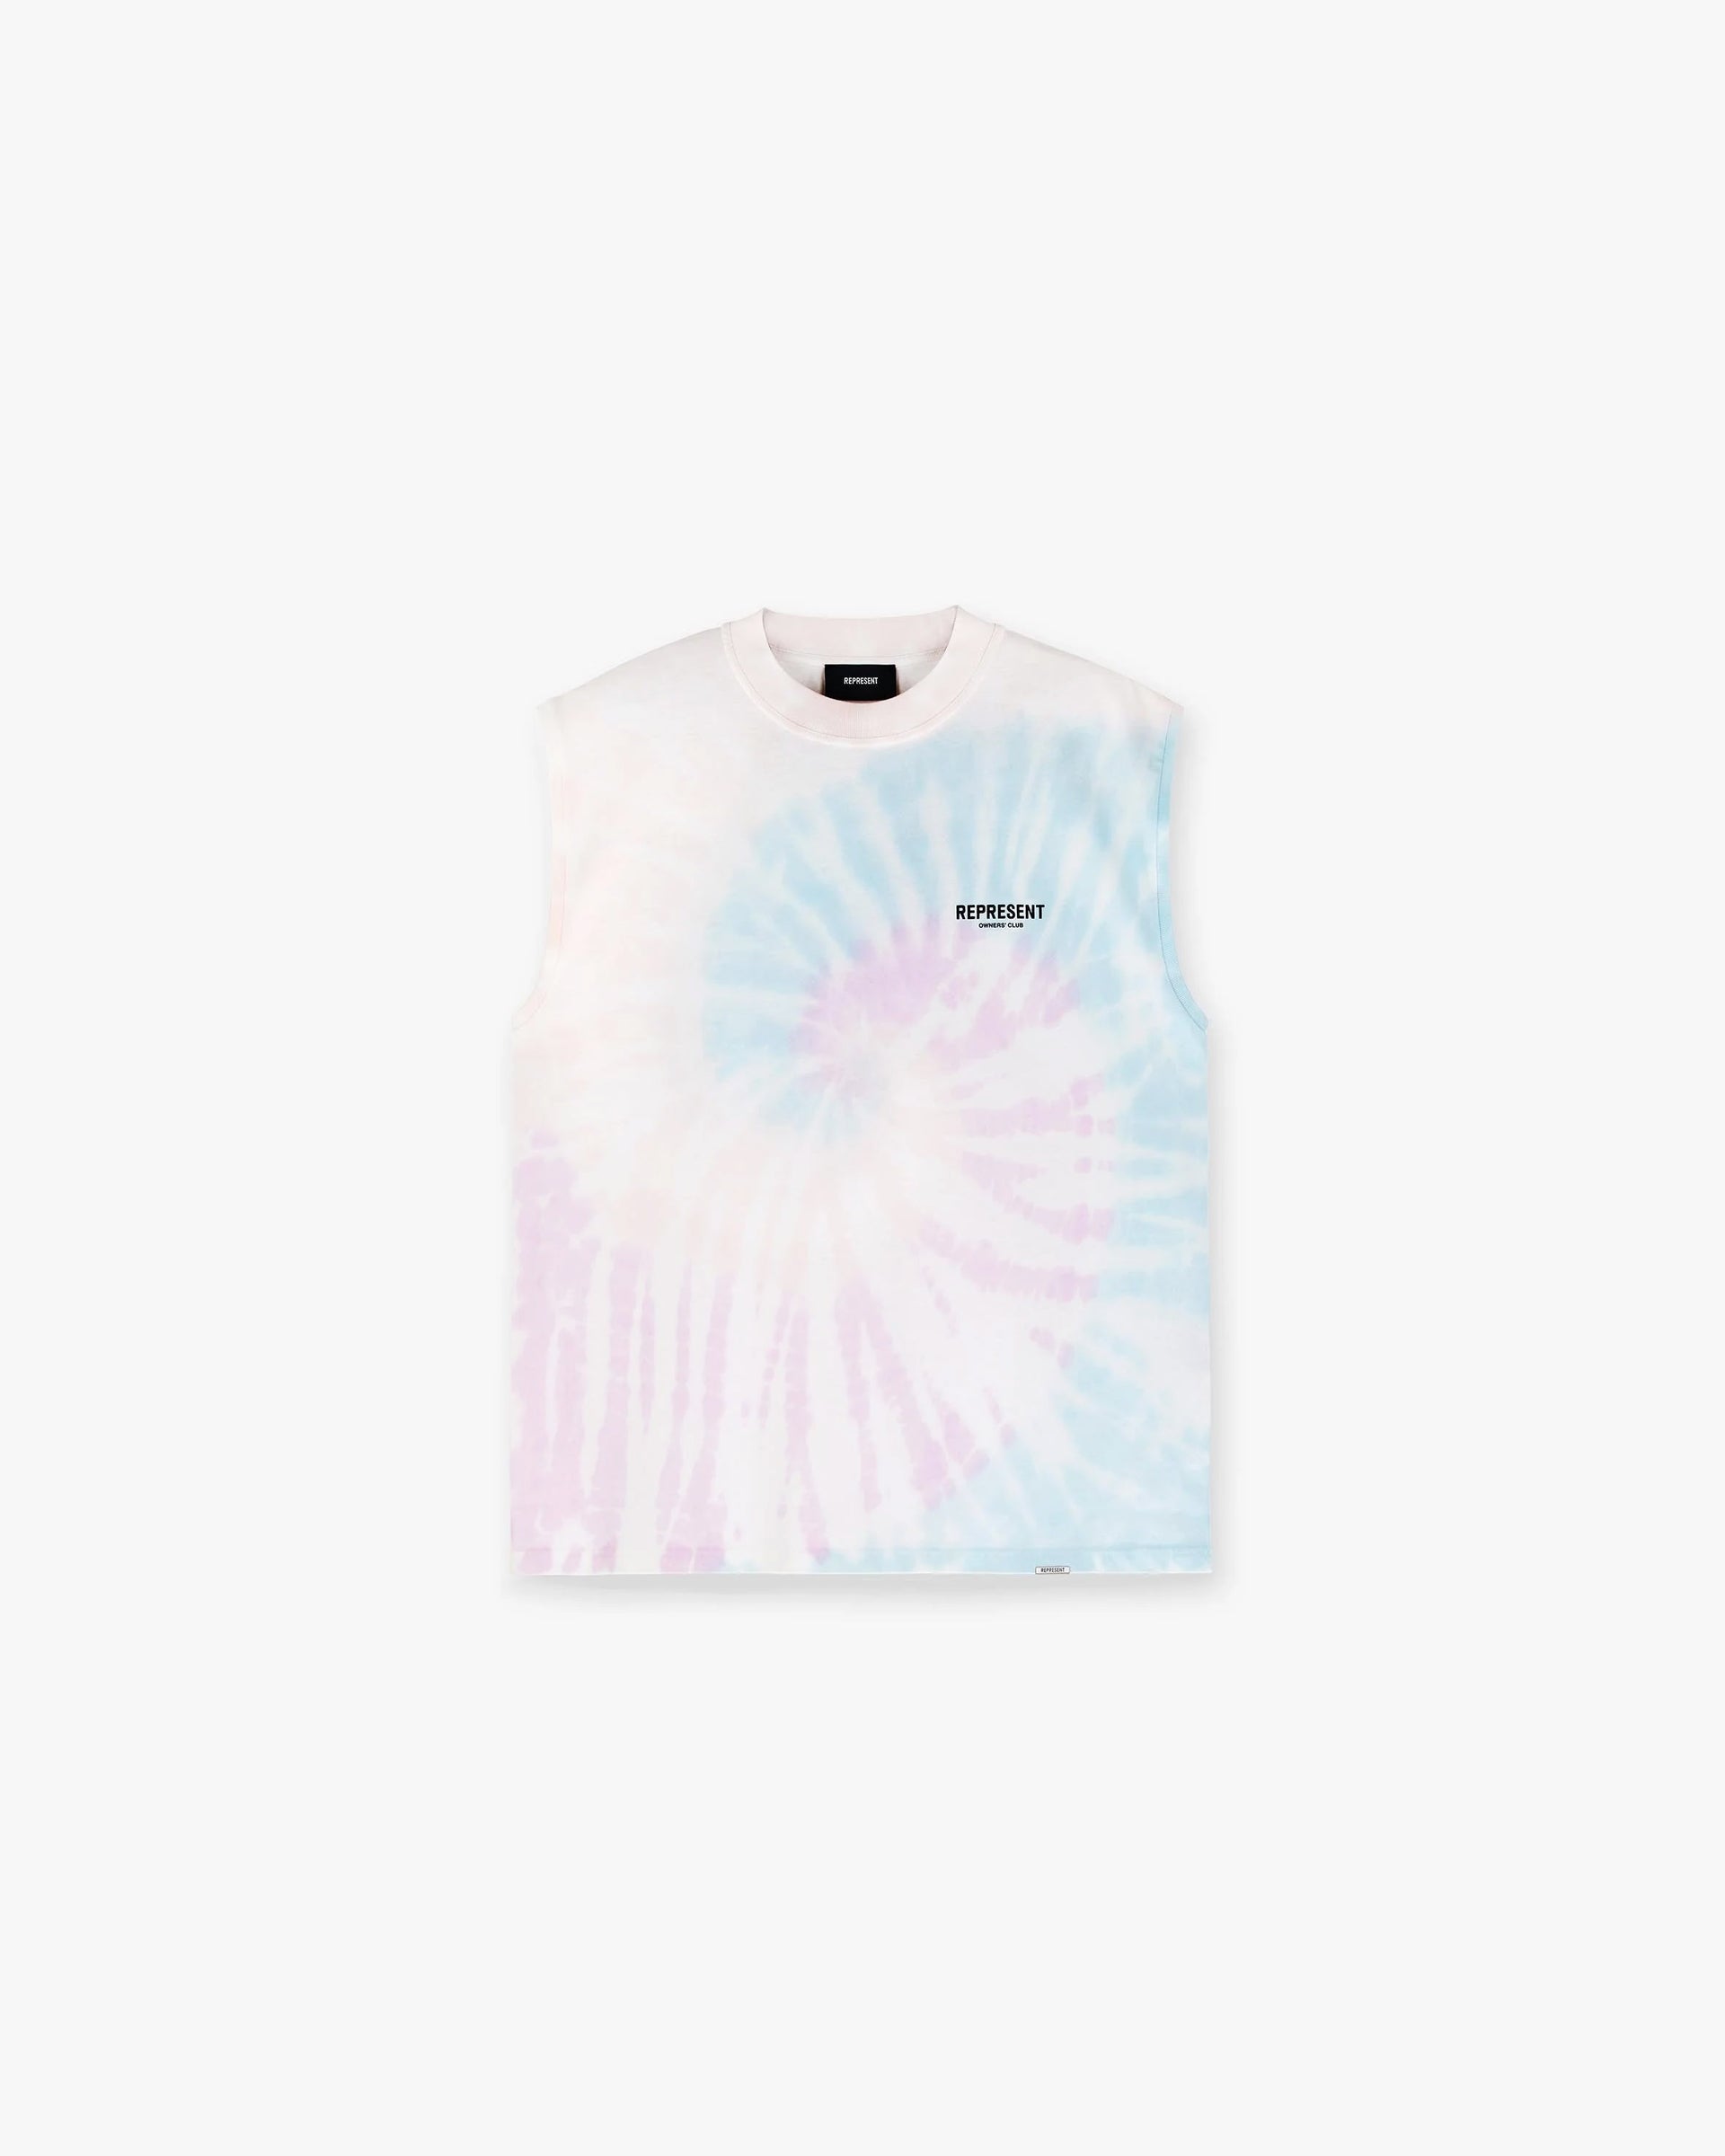 Represent Owners Club Tank | Tie Dye T-Shirts Owners Club | Represent Clo